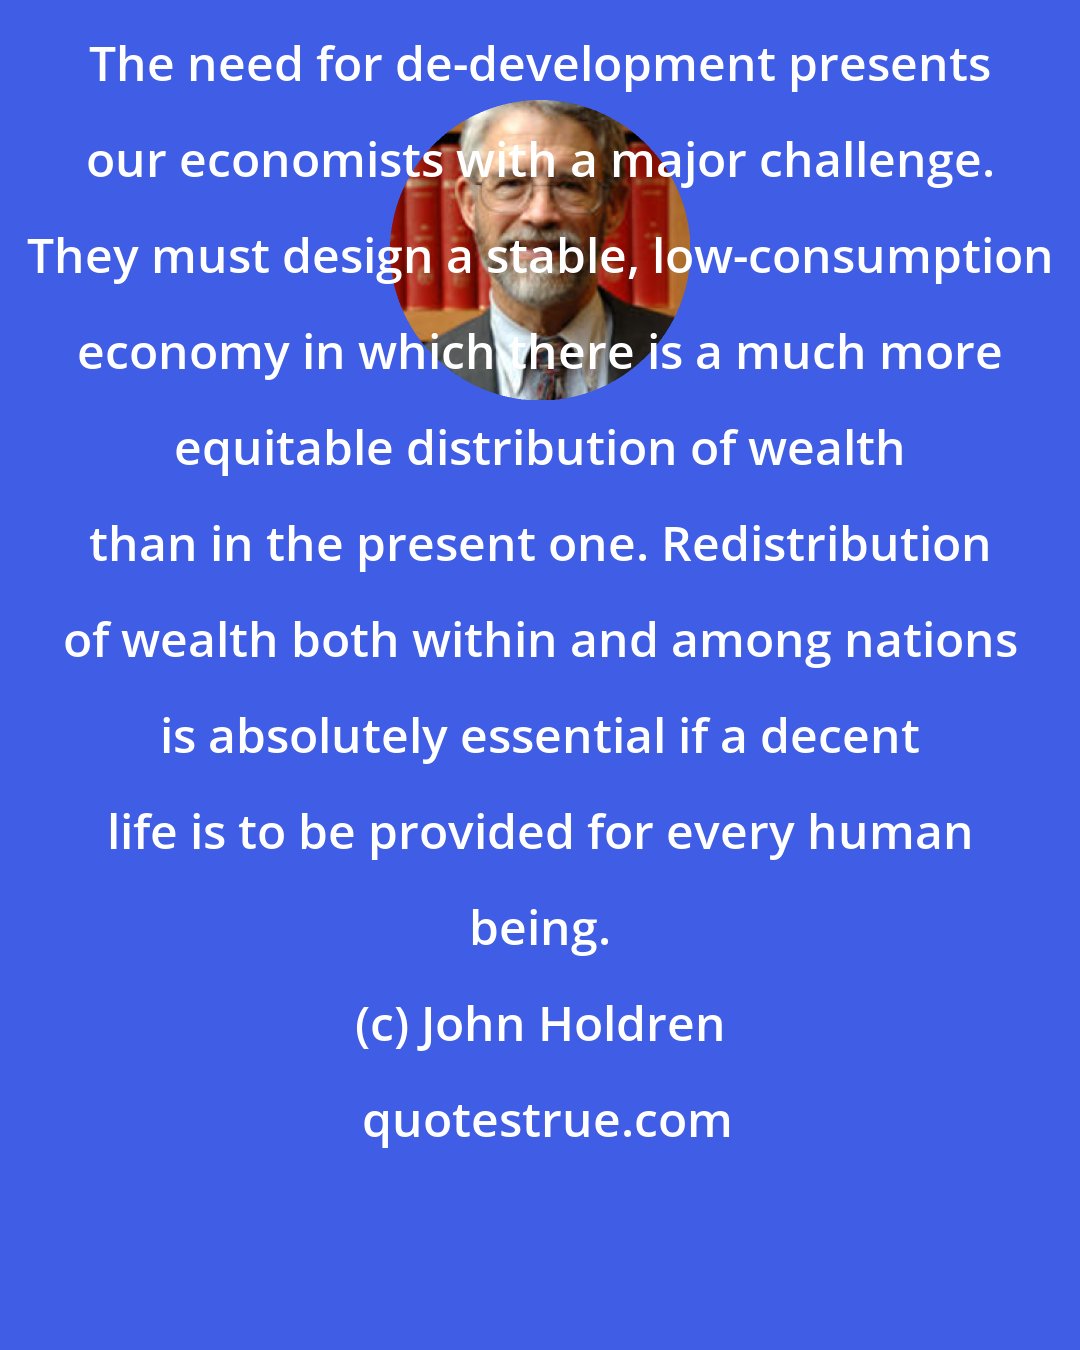 John Holdren: The need for de-development presents our economists with a major challenge. They must design a stable, low-consumption economy in which there is a much more equitable distribution of wealth than in the present one. Redistribution of wealth both within and among nations is absolutely essential if a decent life is to be provided for every human being.